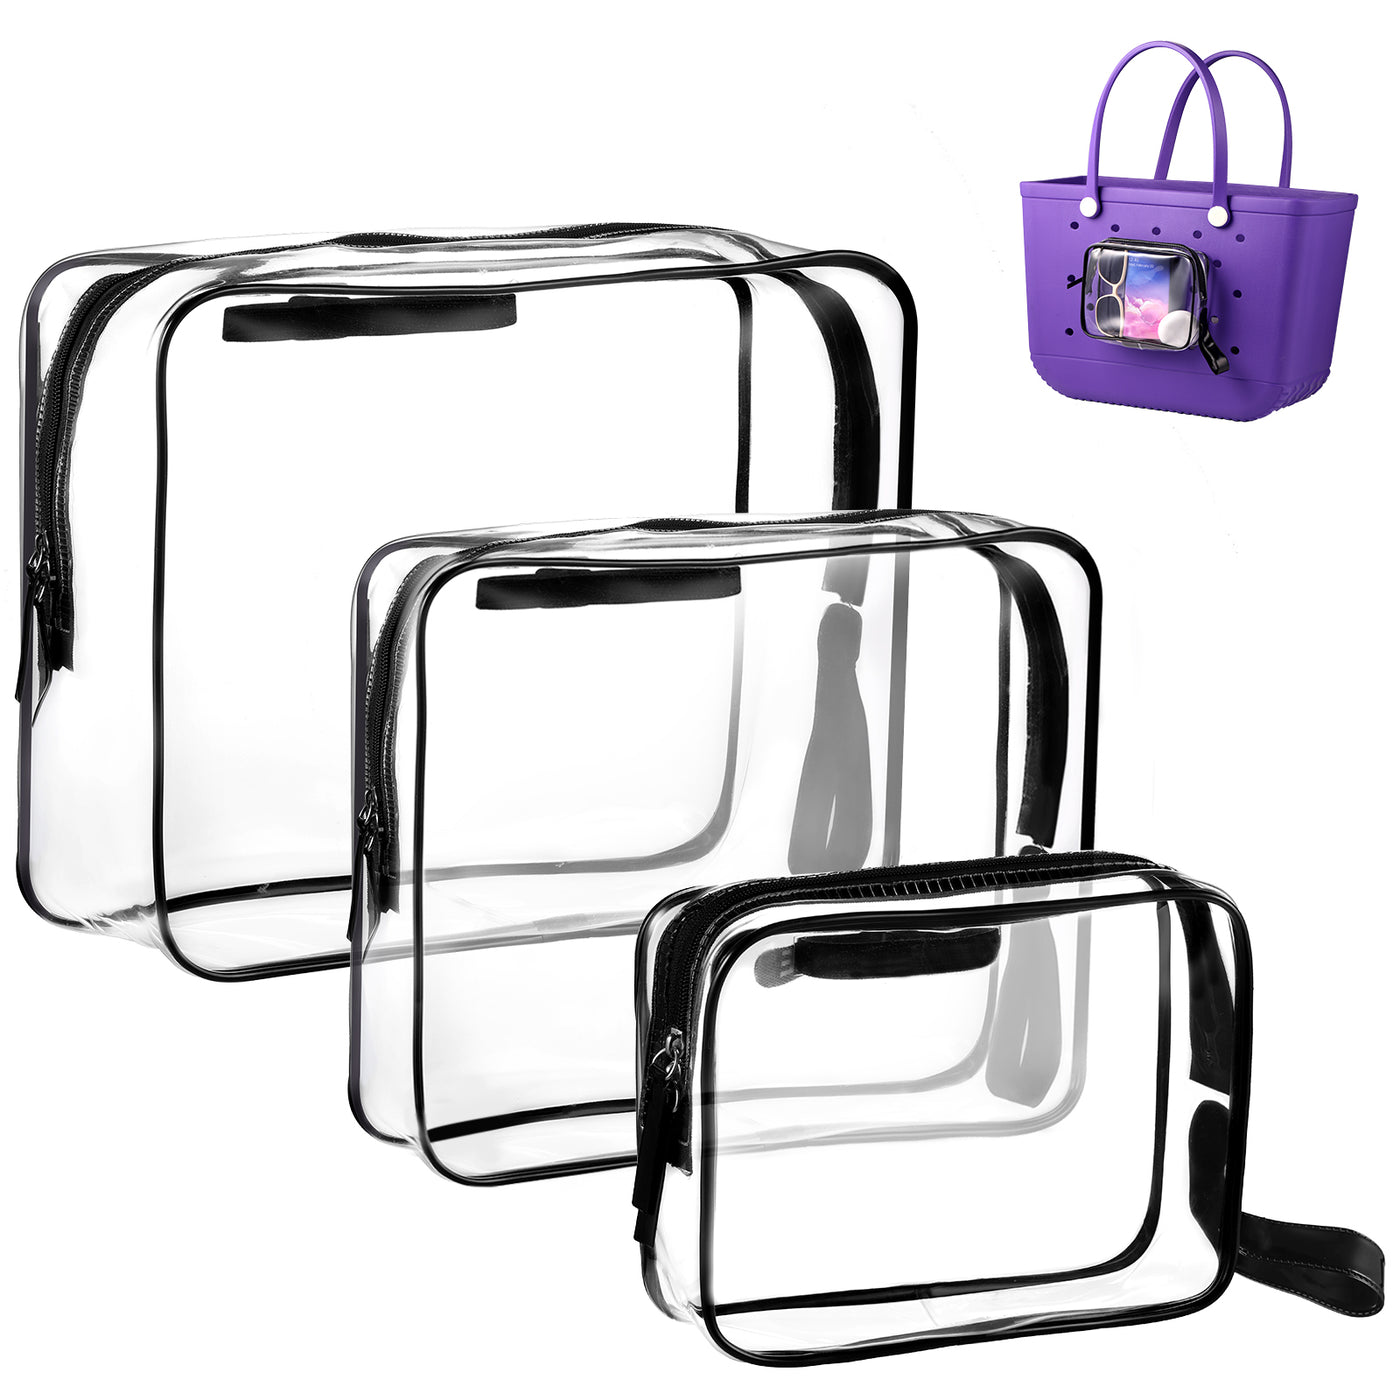 Pouch Inner Bag Tote Bag Organizer Insert Bag With Zipper For Tote